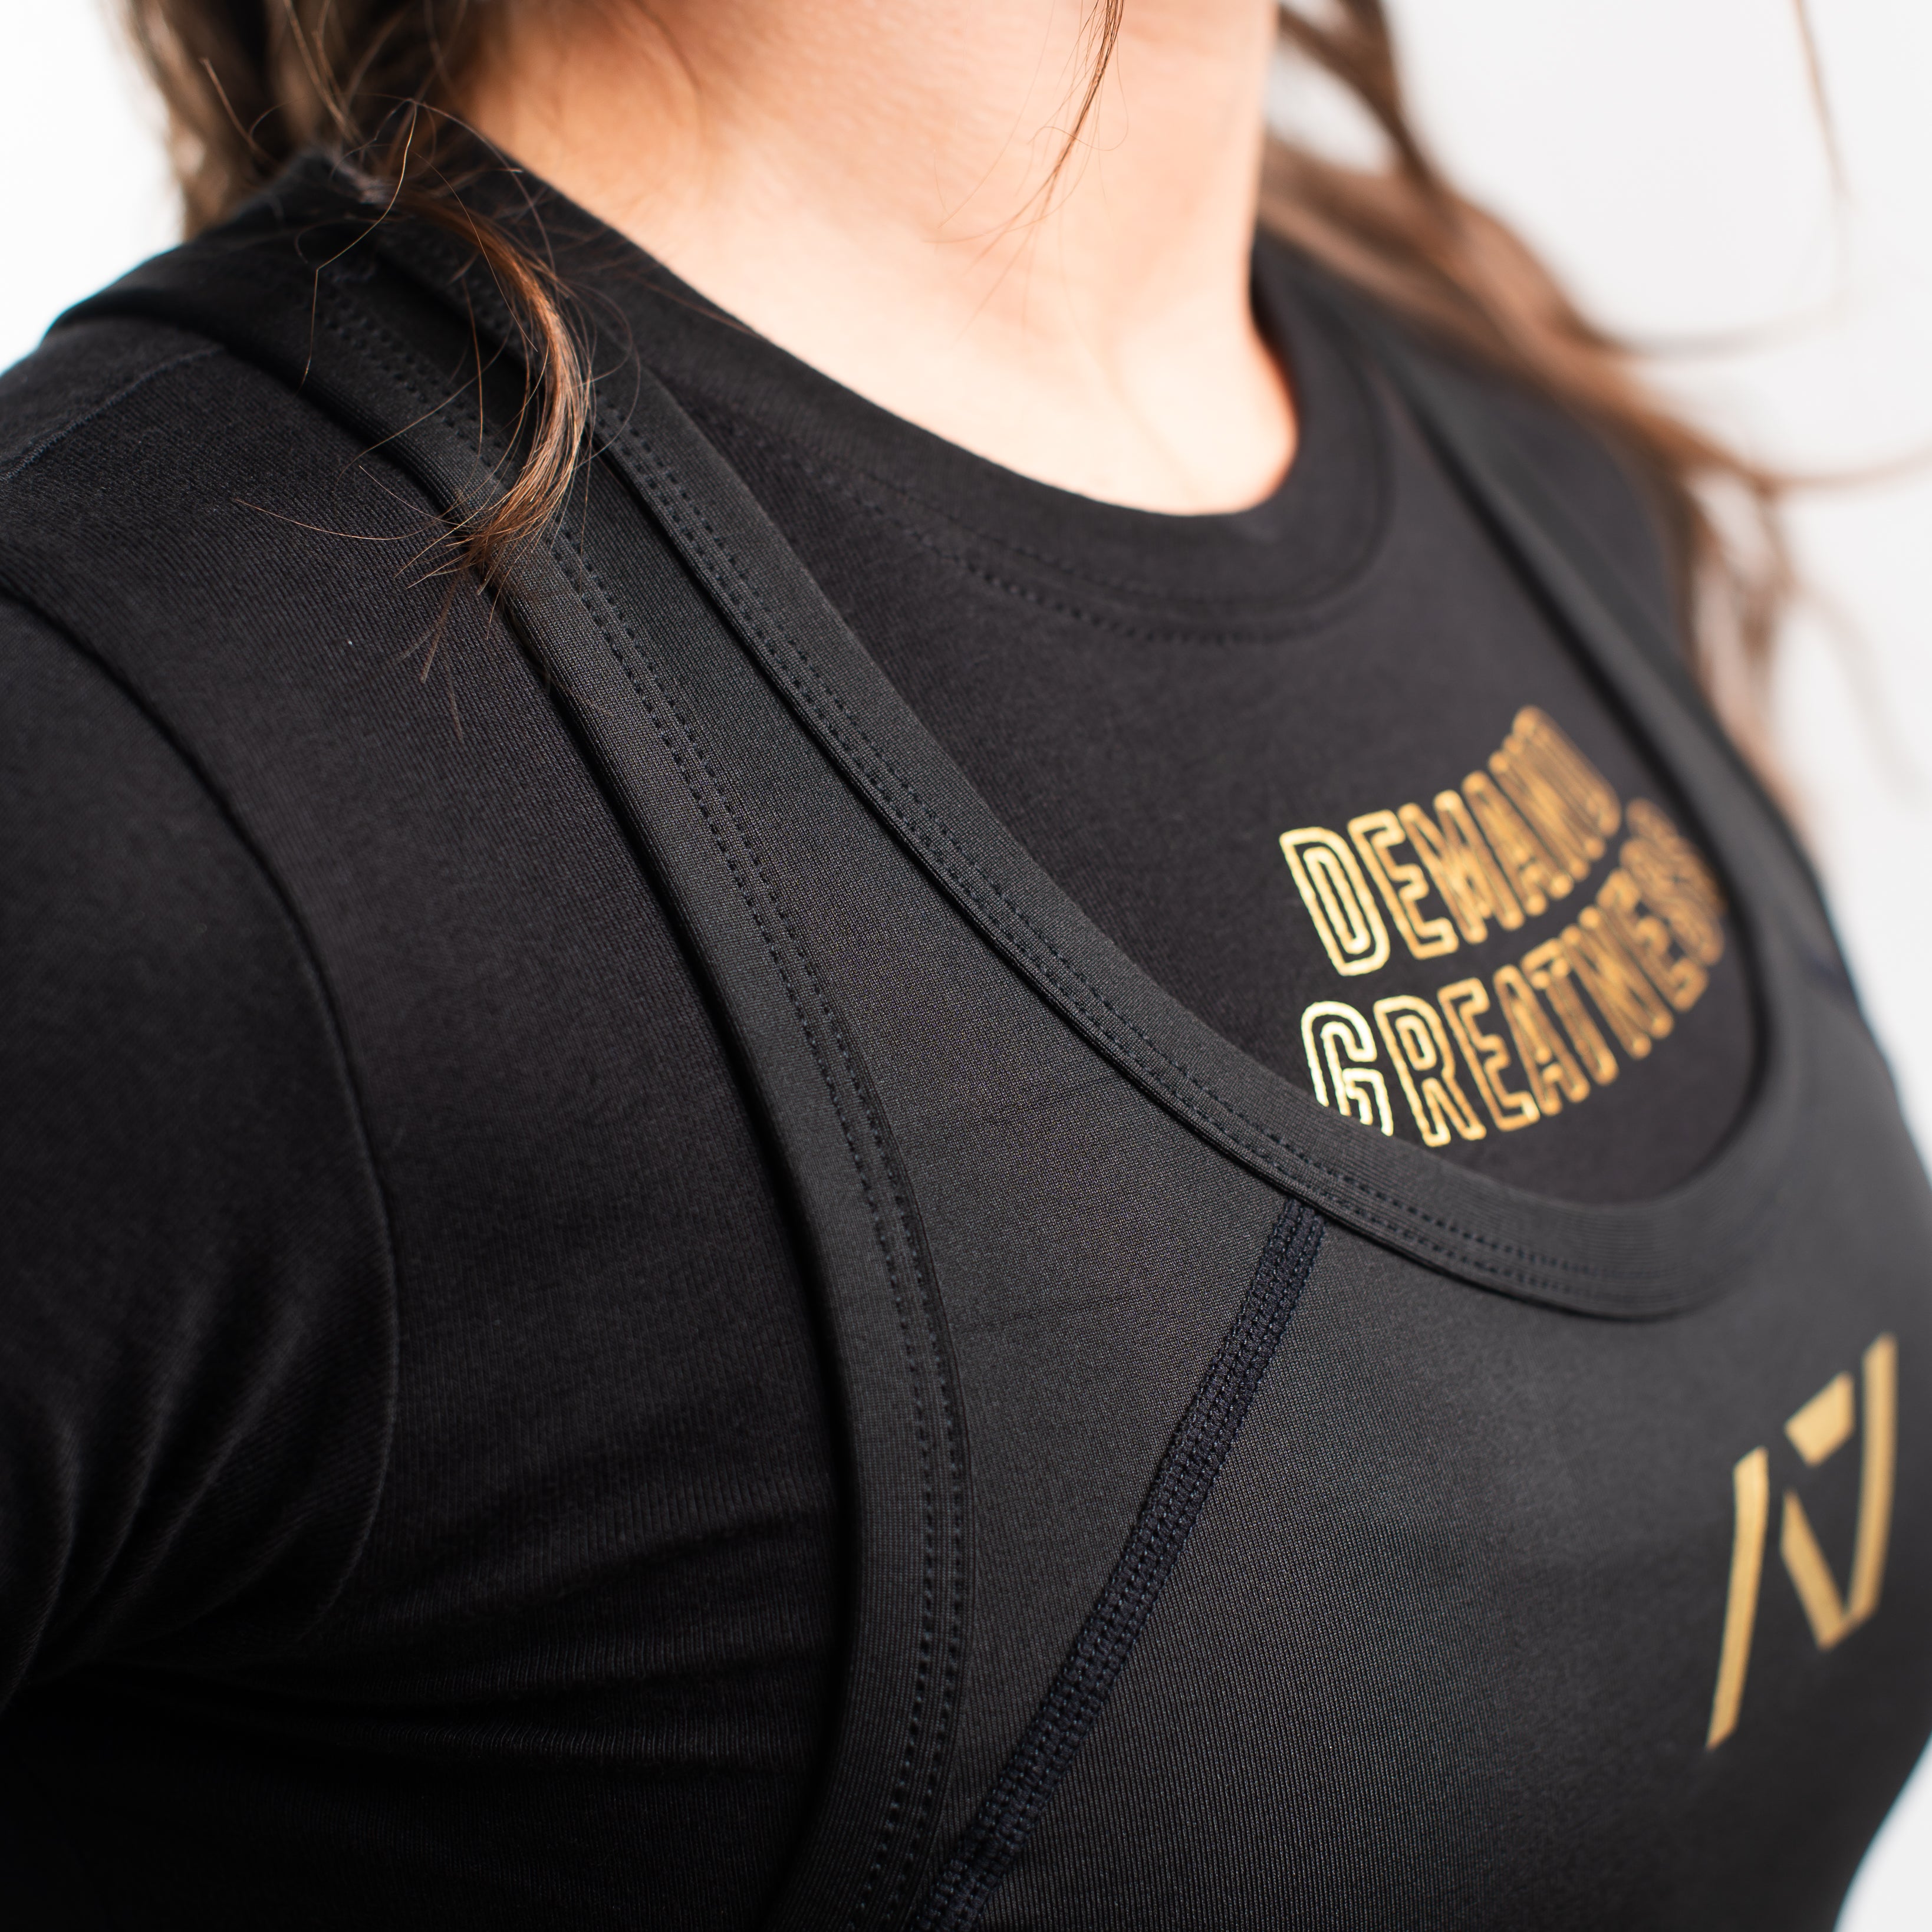 A7 IPF Approved Gold Luno singlet features extra lat mobility, side panel stitching to guide the squat depth level and curved panel design for a slimming look. The Women's cut singlet features a tapered waist and additional quad room. The IPF Approved Kit includes Powerlifting Singlet, A7 Meet Shirt, A7 Zebra Wrist Wraps, A7 Deadlift Socks, Hourglass Knee Sleeves (Stiff Knee Sleeves and Rigor Mortis Knee Sleeves). Genouillères powerlifting shipping to France, Spain, Ireland, Germany, Italy, Sweden and EU.